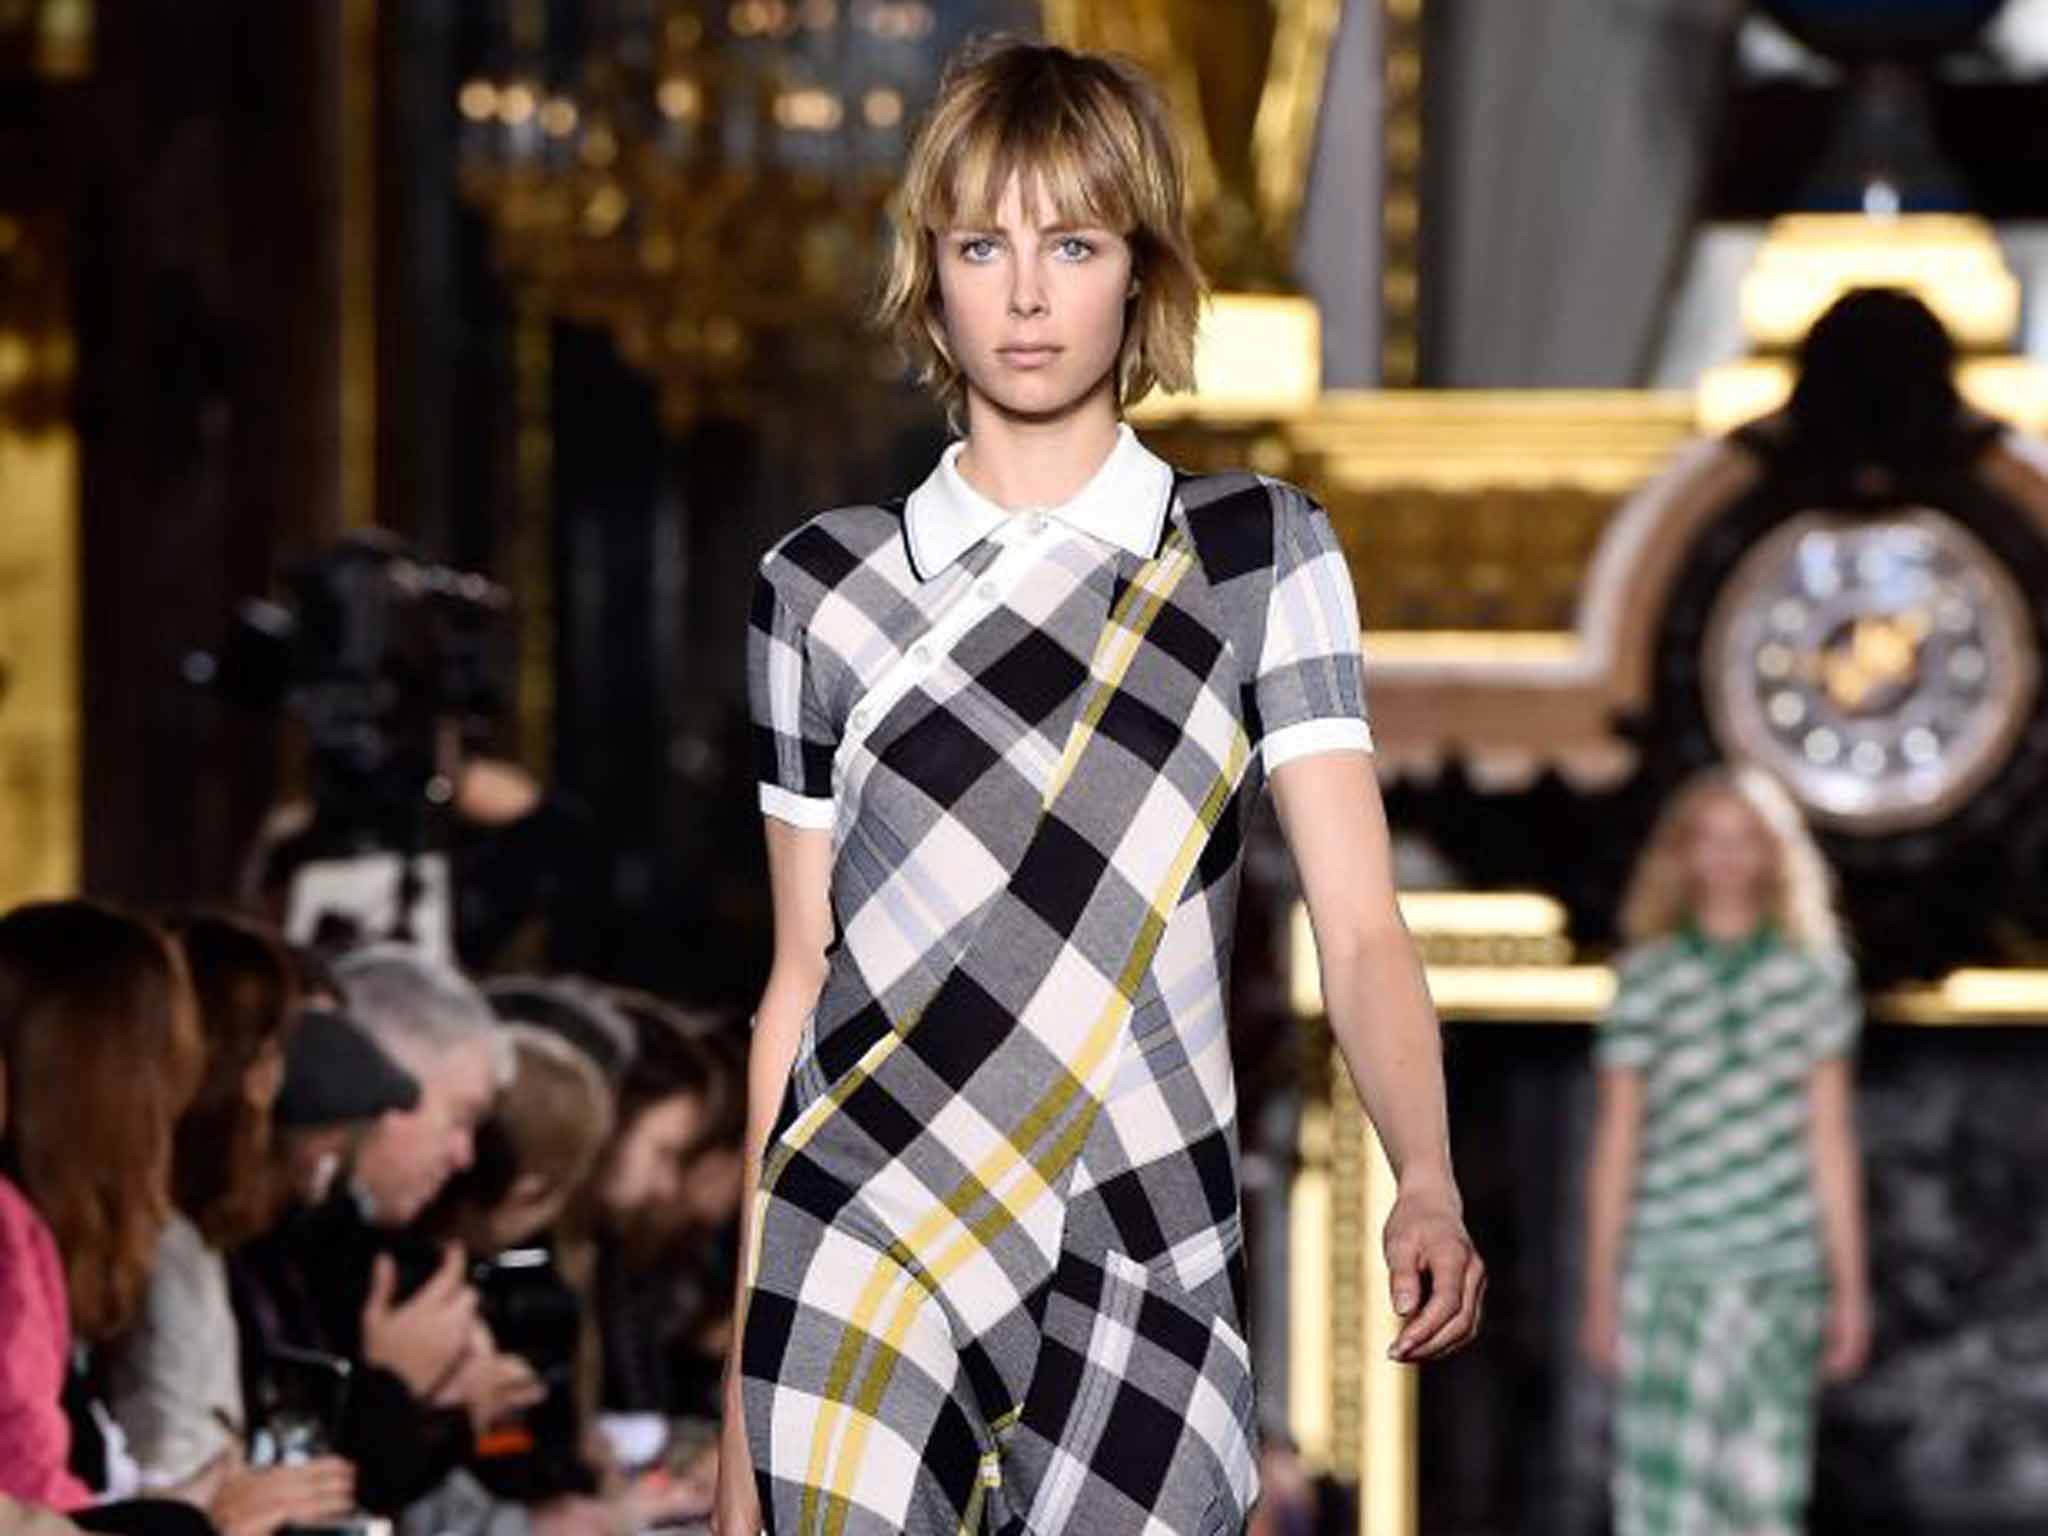 Celine brings rock music element into Hollywood fashion show